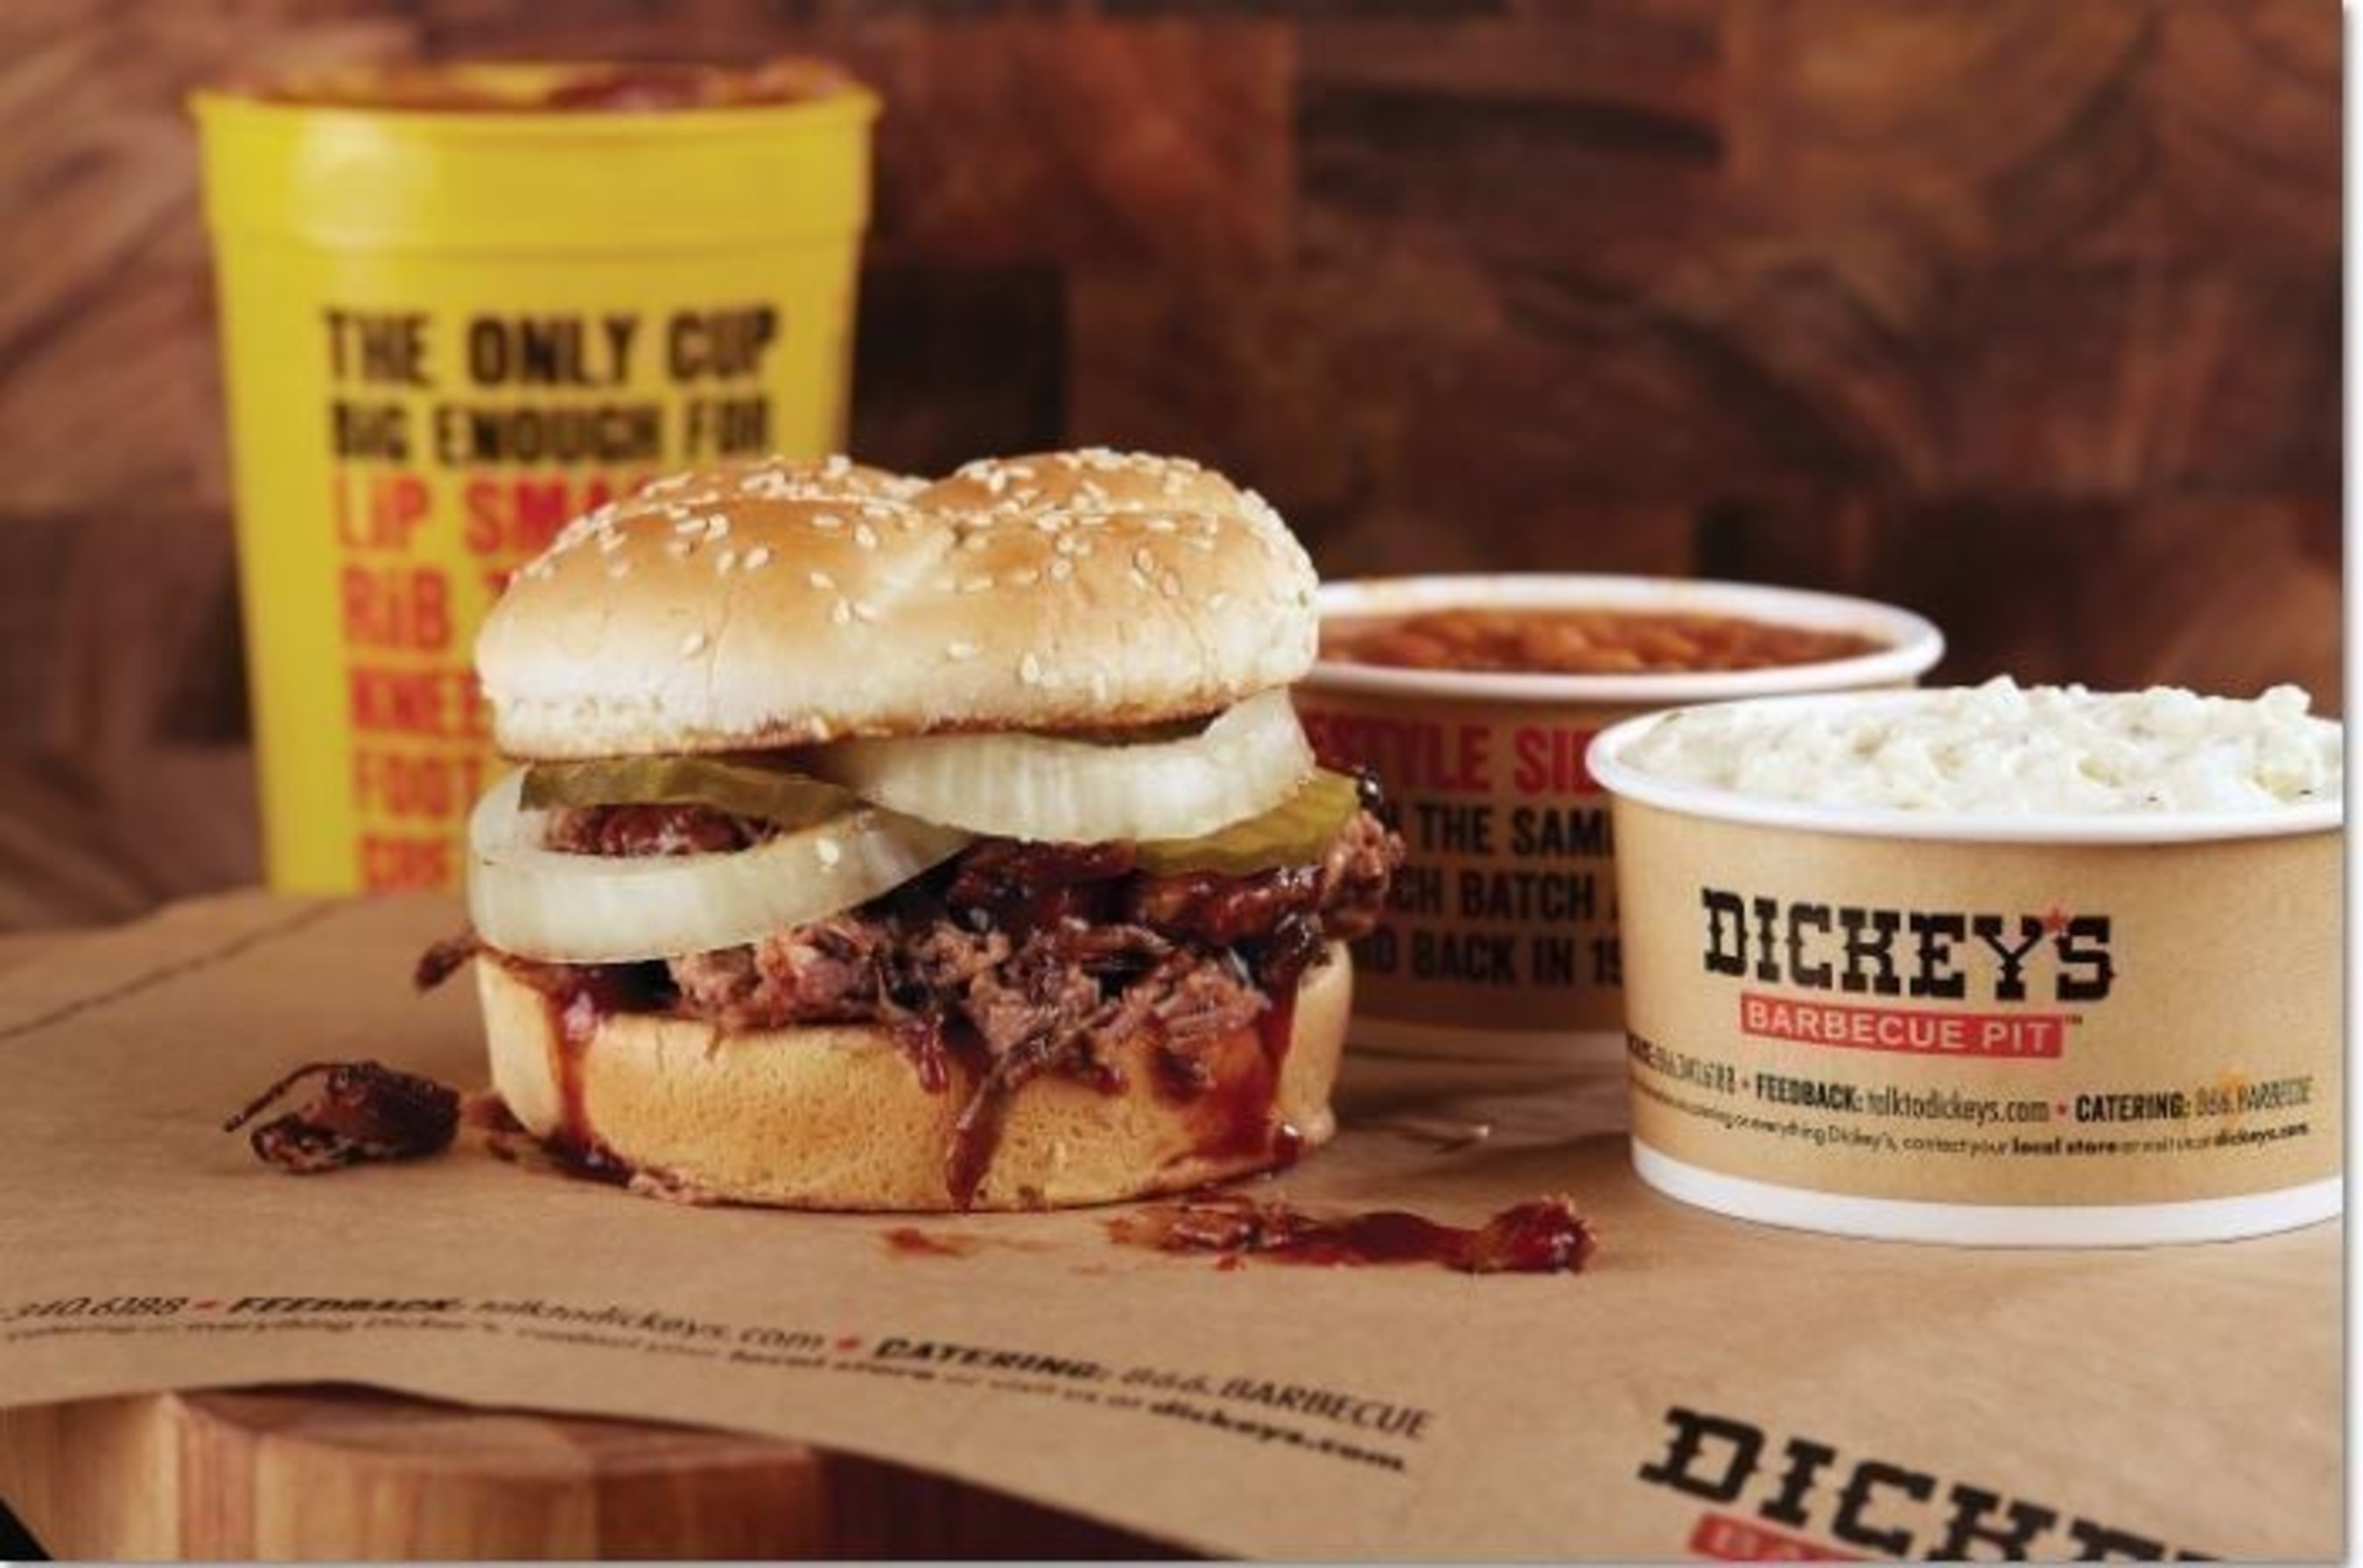 Dickey's Barbecue Pit in Lewisburg opens Thursday with three-day grand opening celebration. First 50 guests receive gift cards worth up to $50. (PRNewsFoto/Dickey's Barbecue)